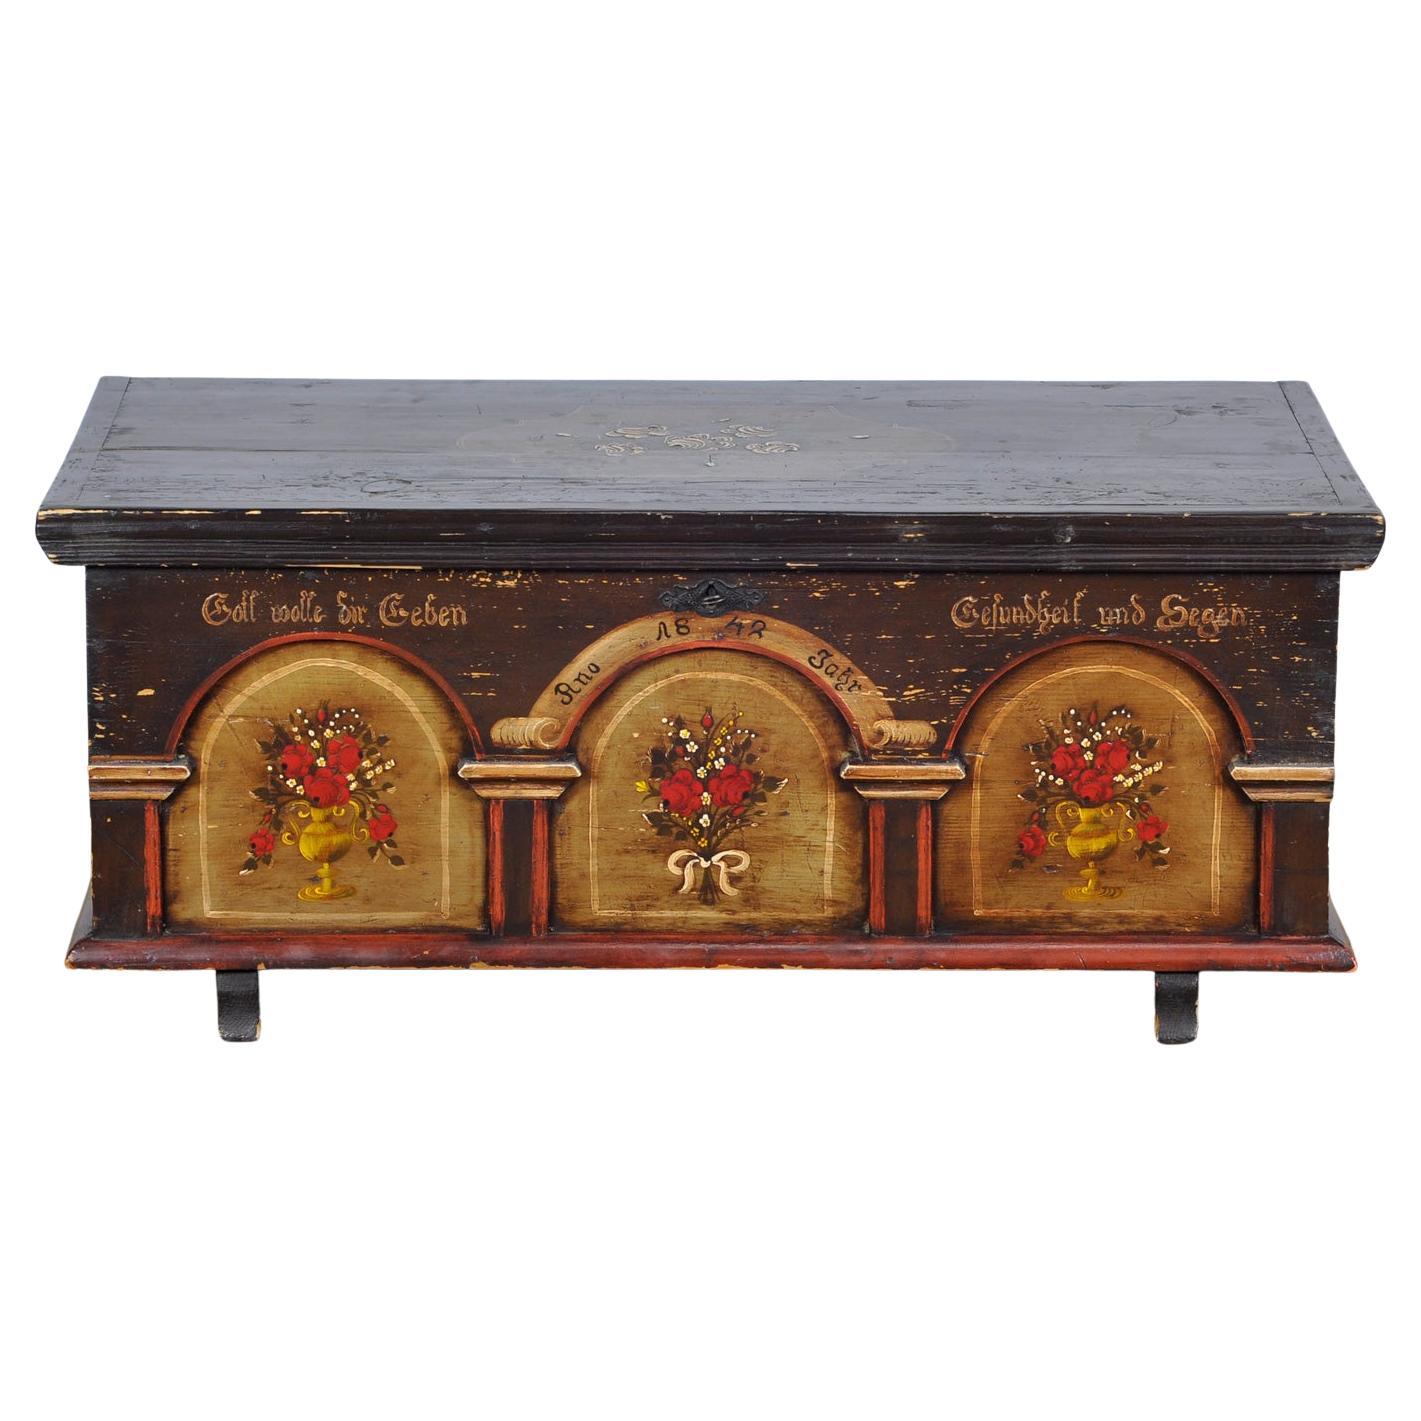 German Wedding Chest from 1842